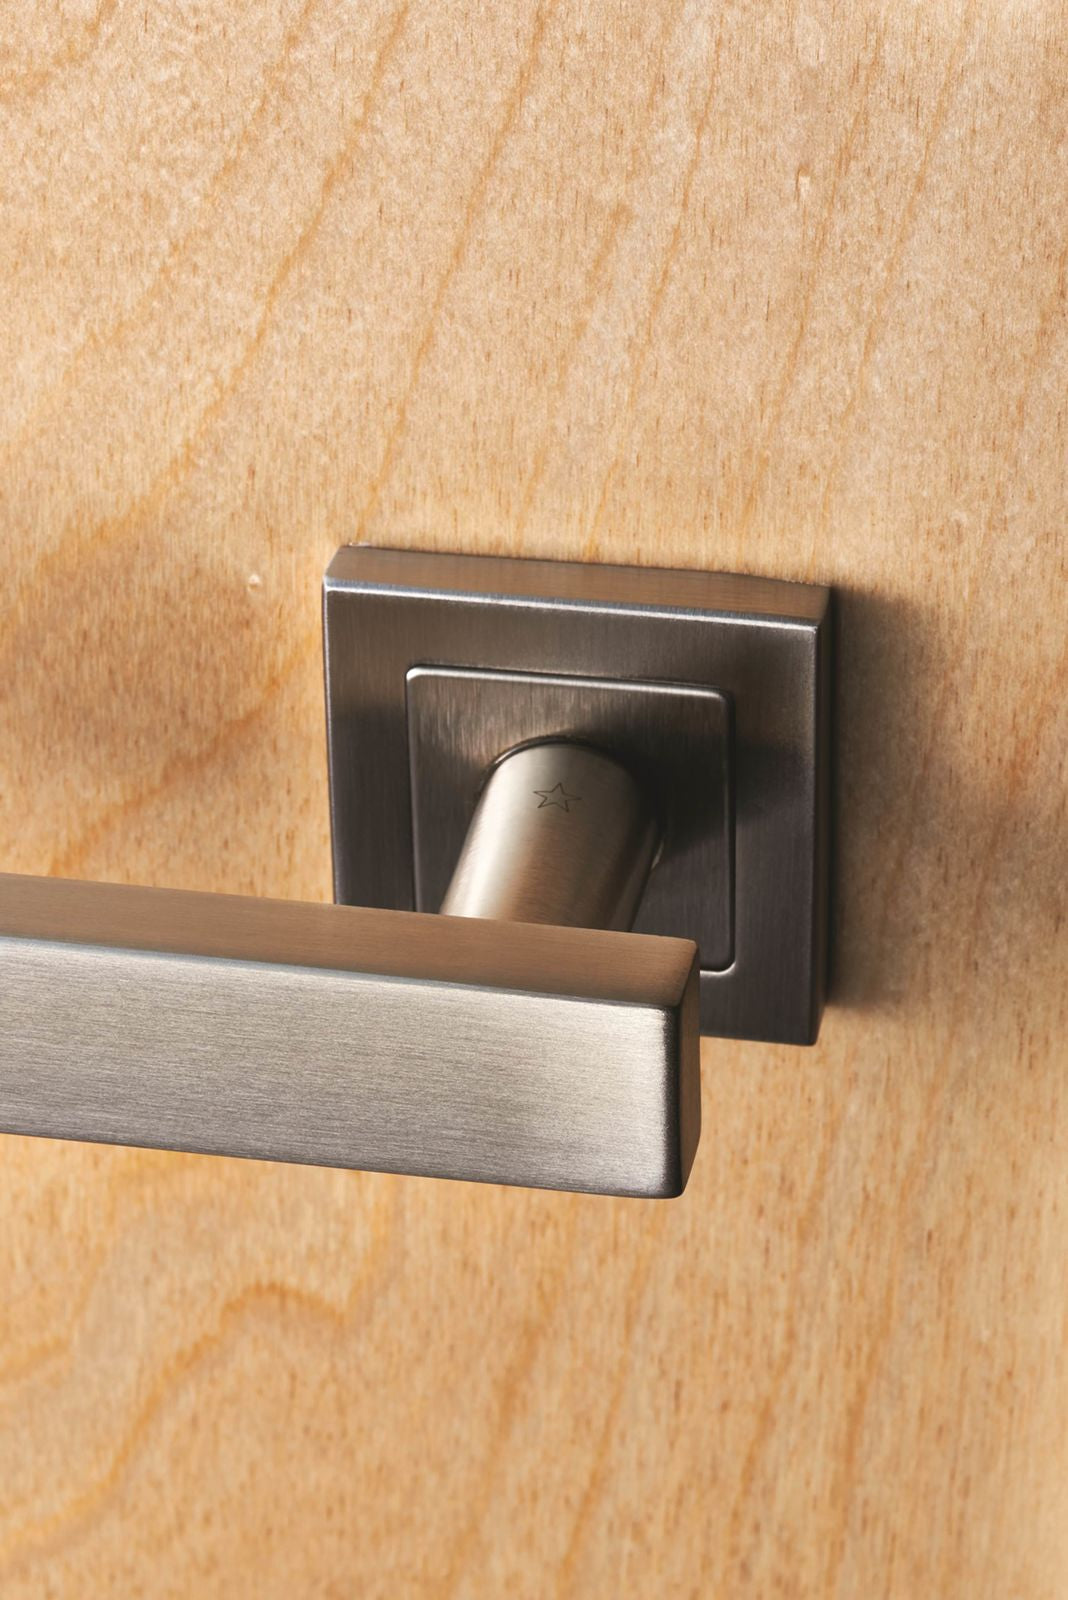 Image showing a EuroSpec Door Handle on a square rose in satin stainless steel.  Available to order from Trade Door Handles, Kendal